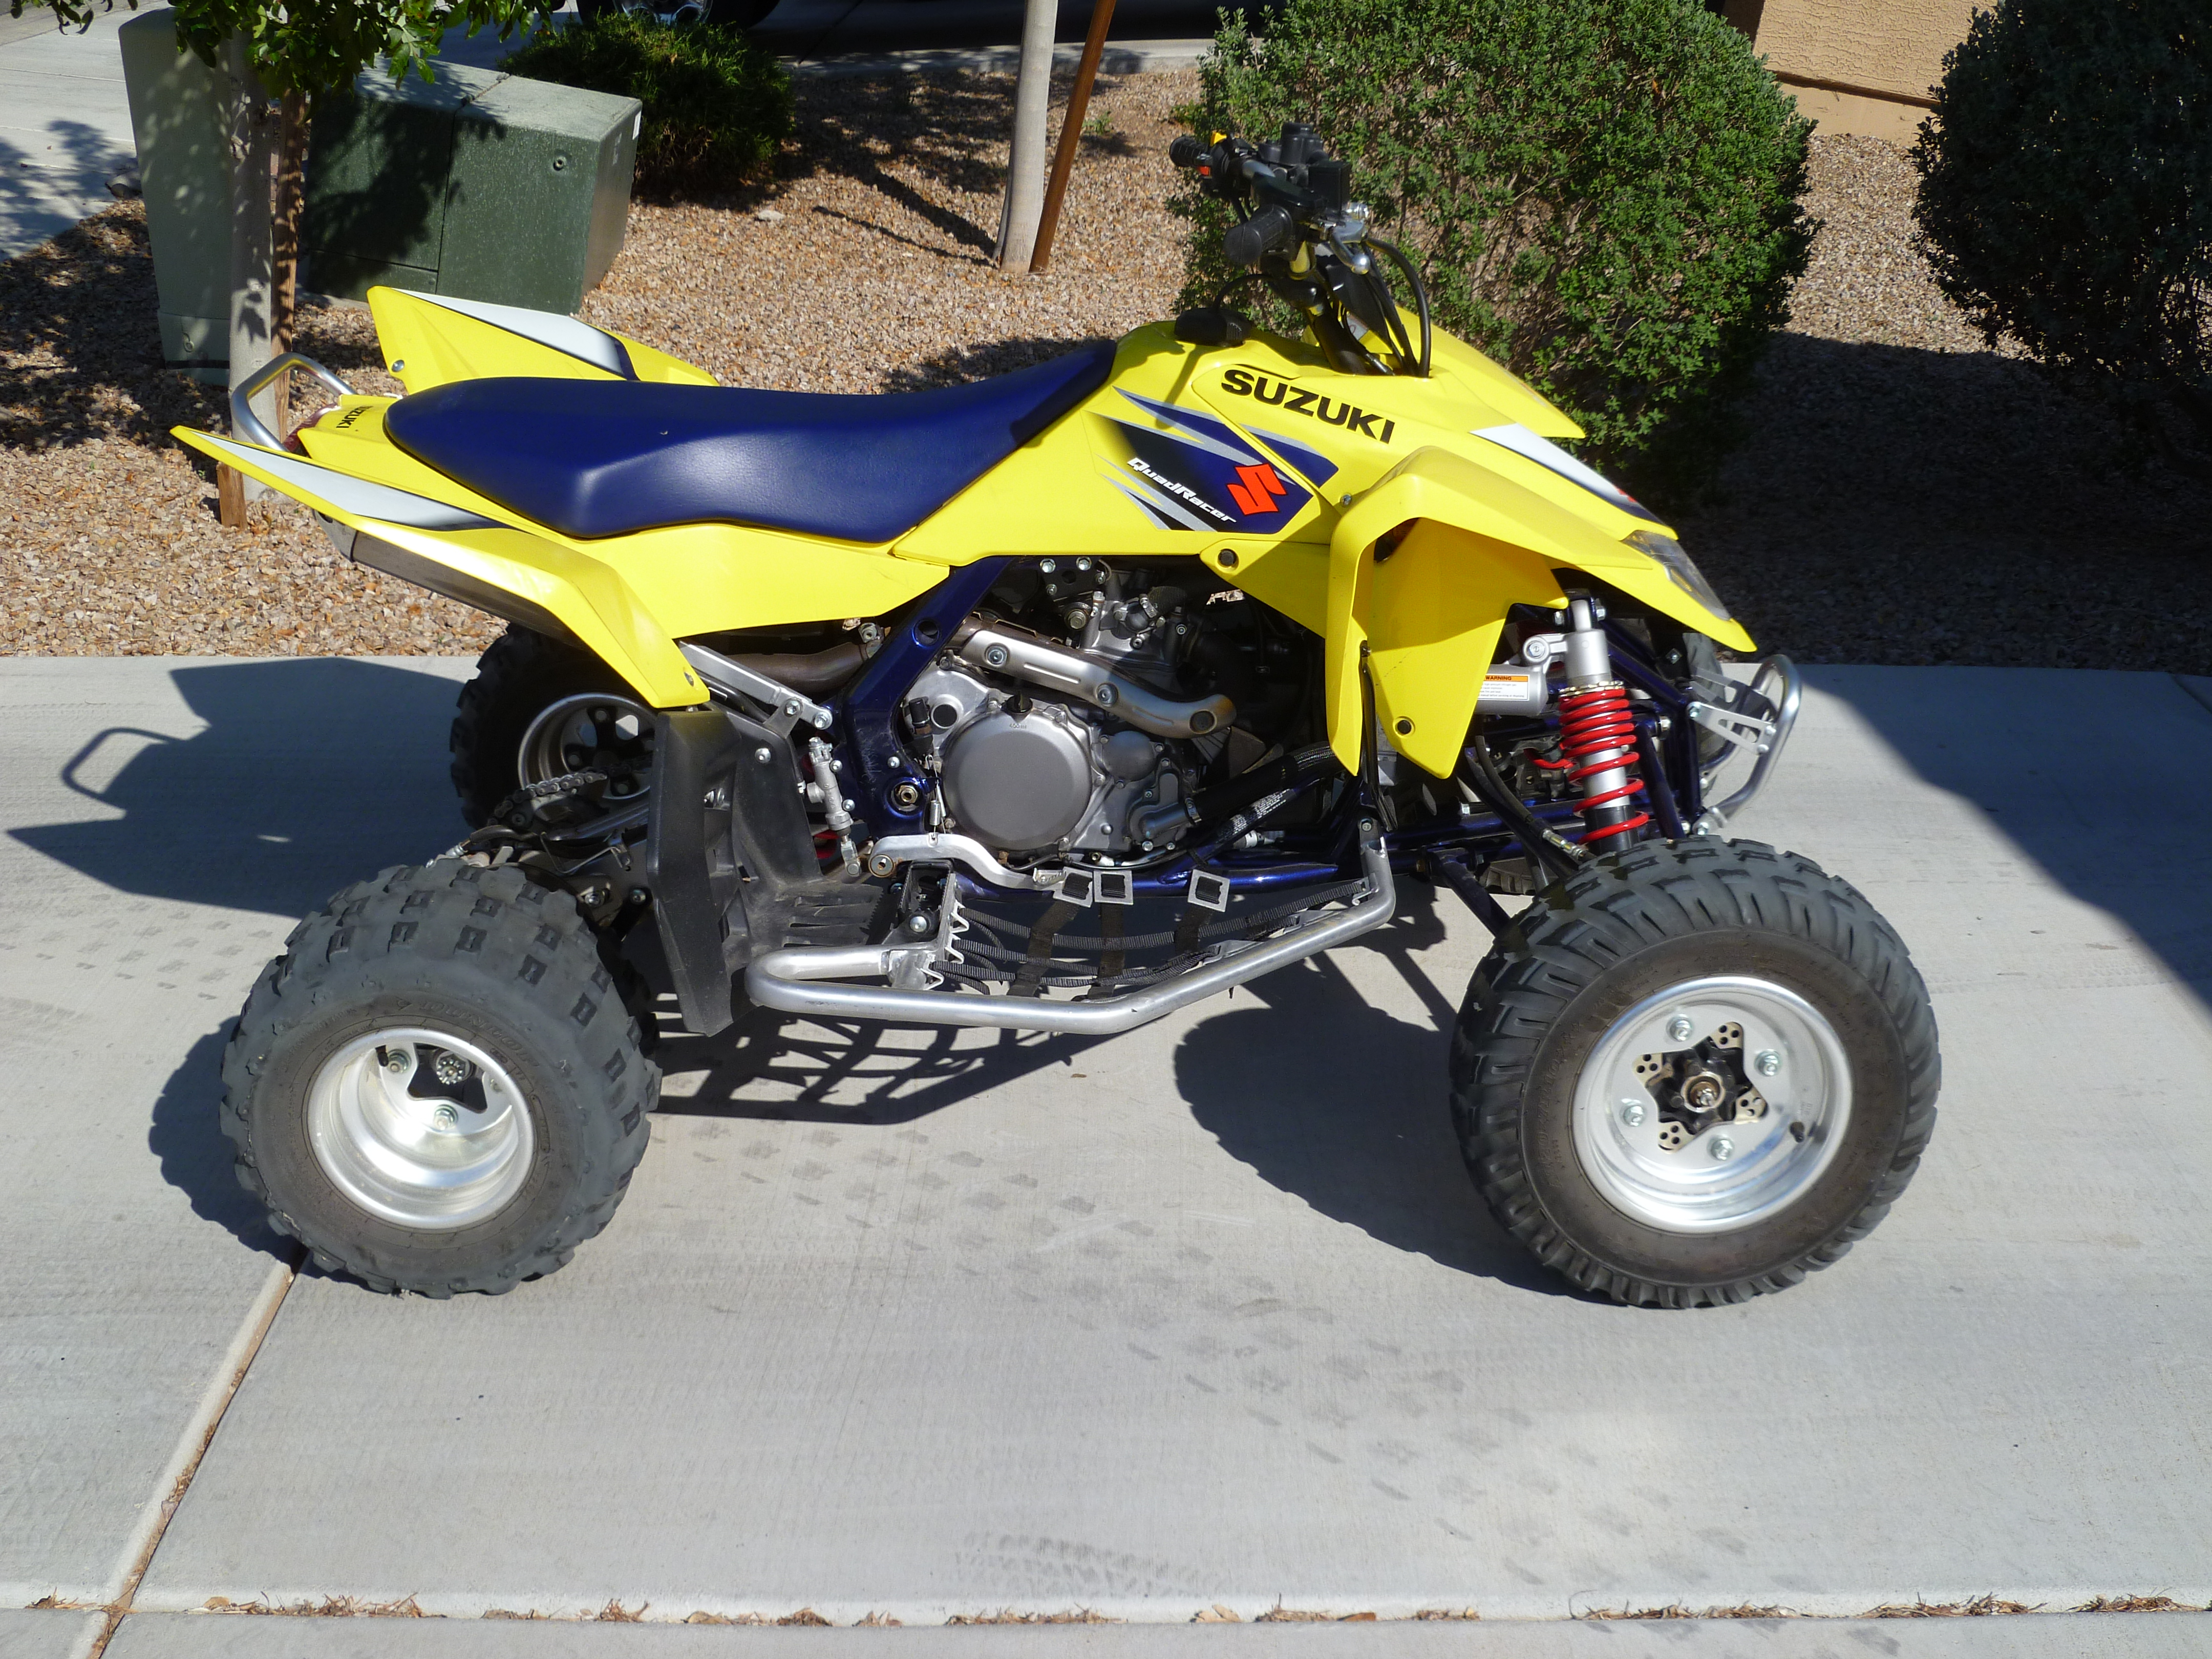 2007 Suzuki Ltr 450 - Classified Ads - CouesWhitetail.com Discussion forum